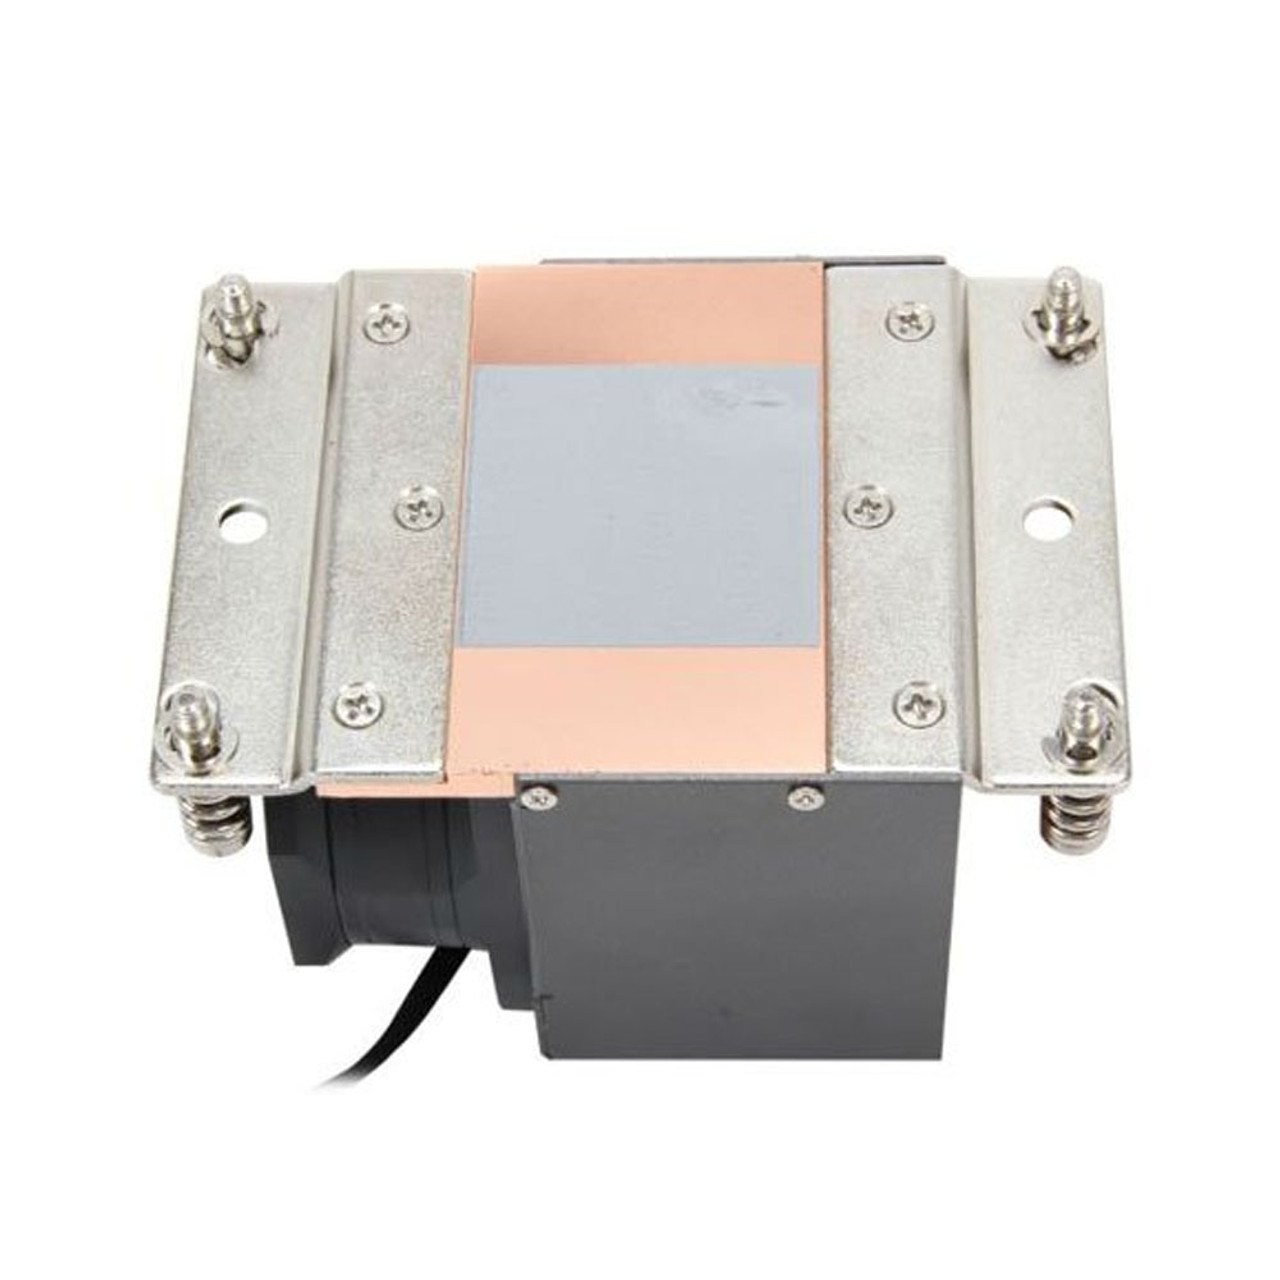 Dynatron R14 Active CPU Cooler with Copper Stacked Fins for Intel2011